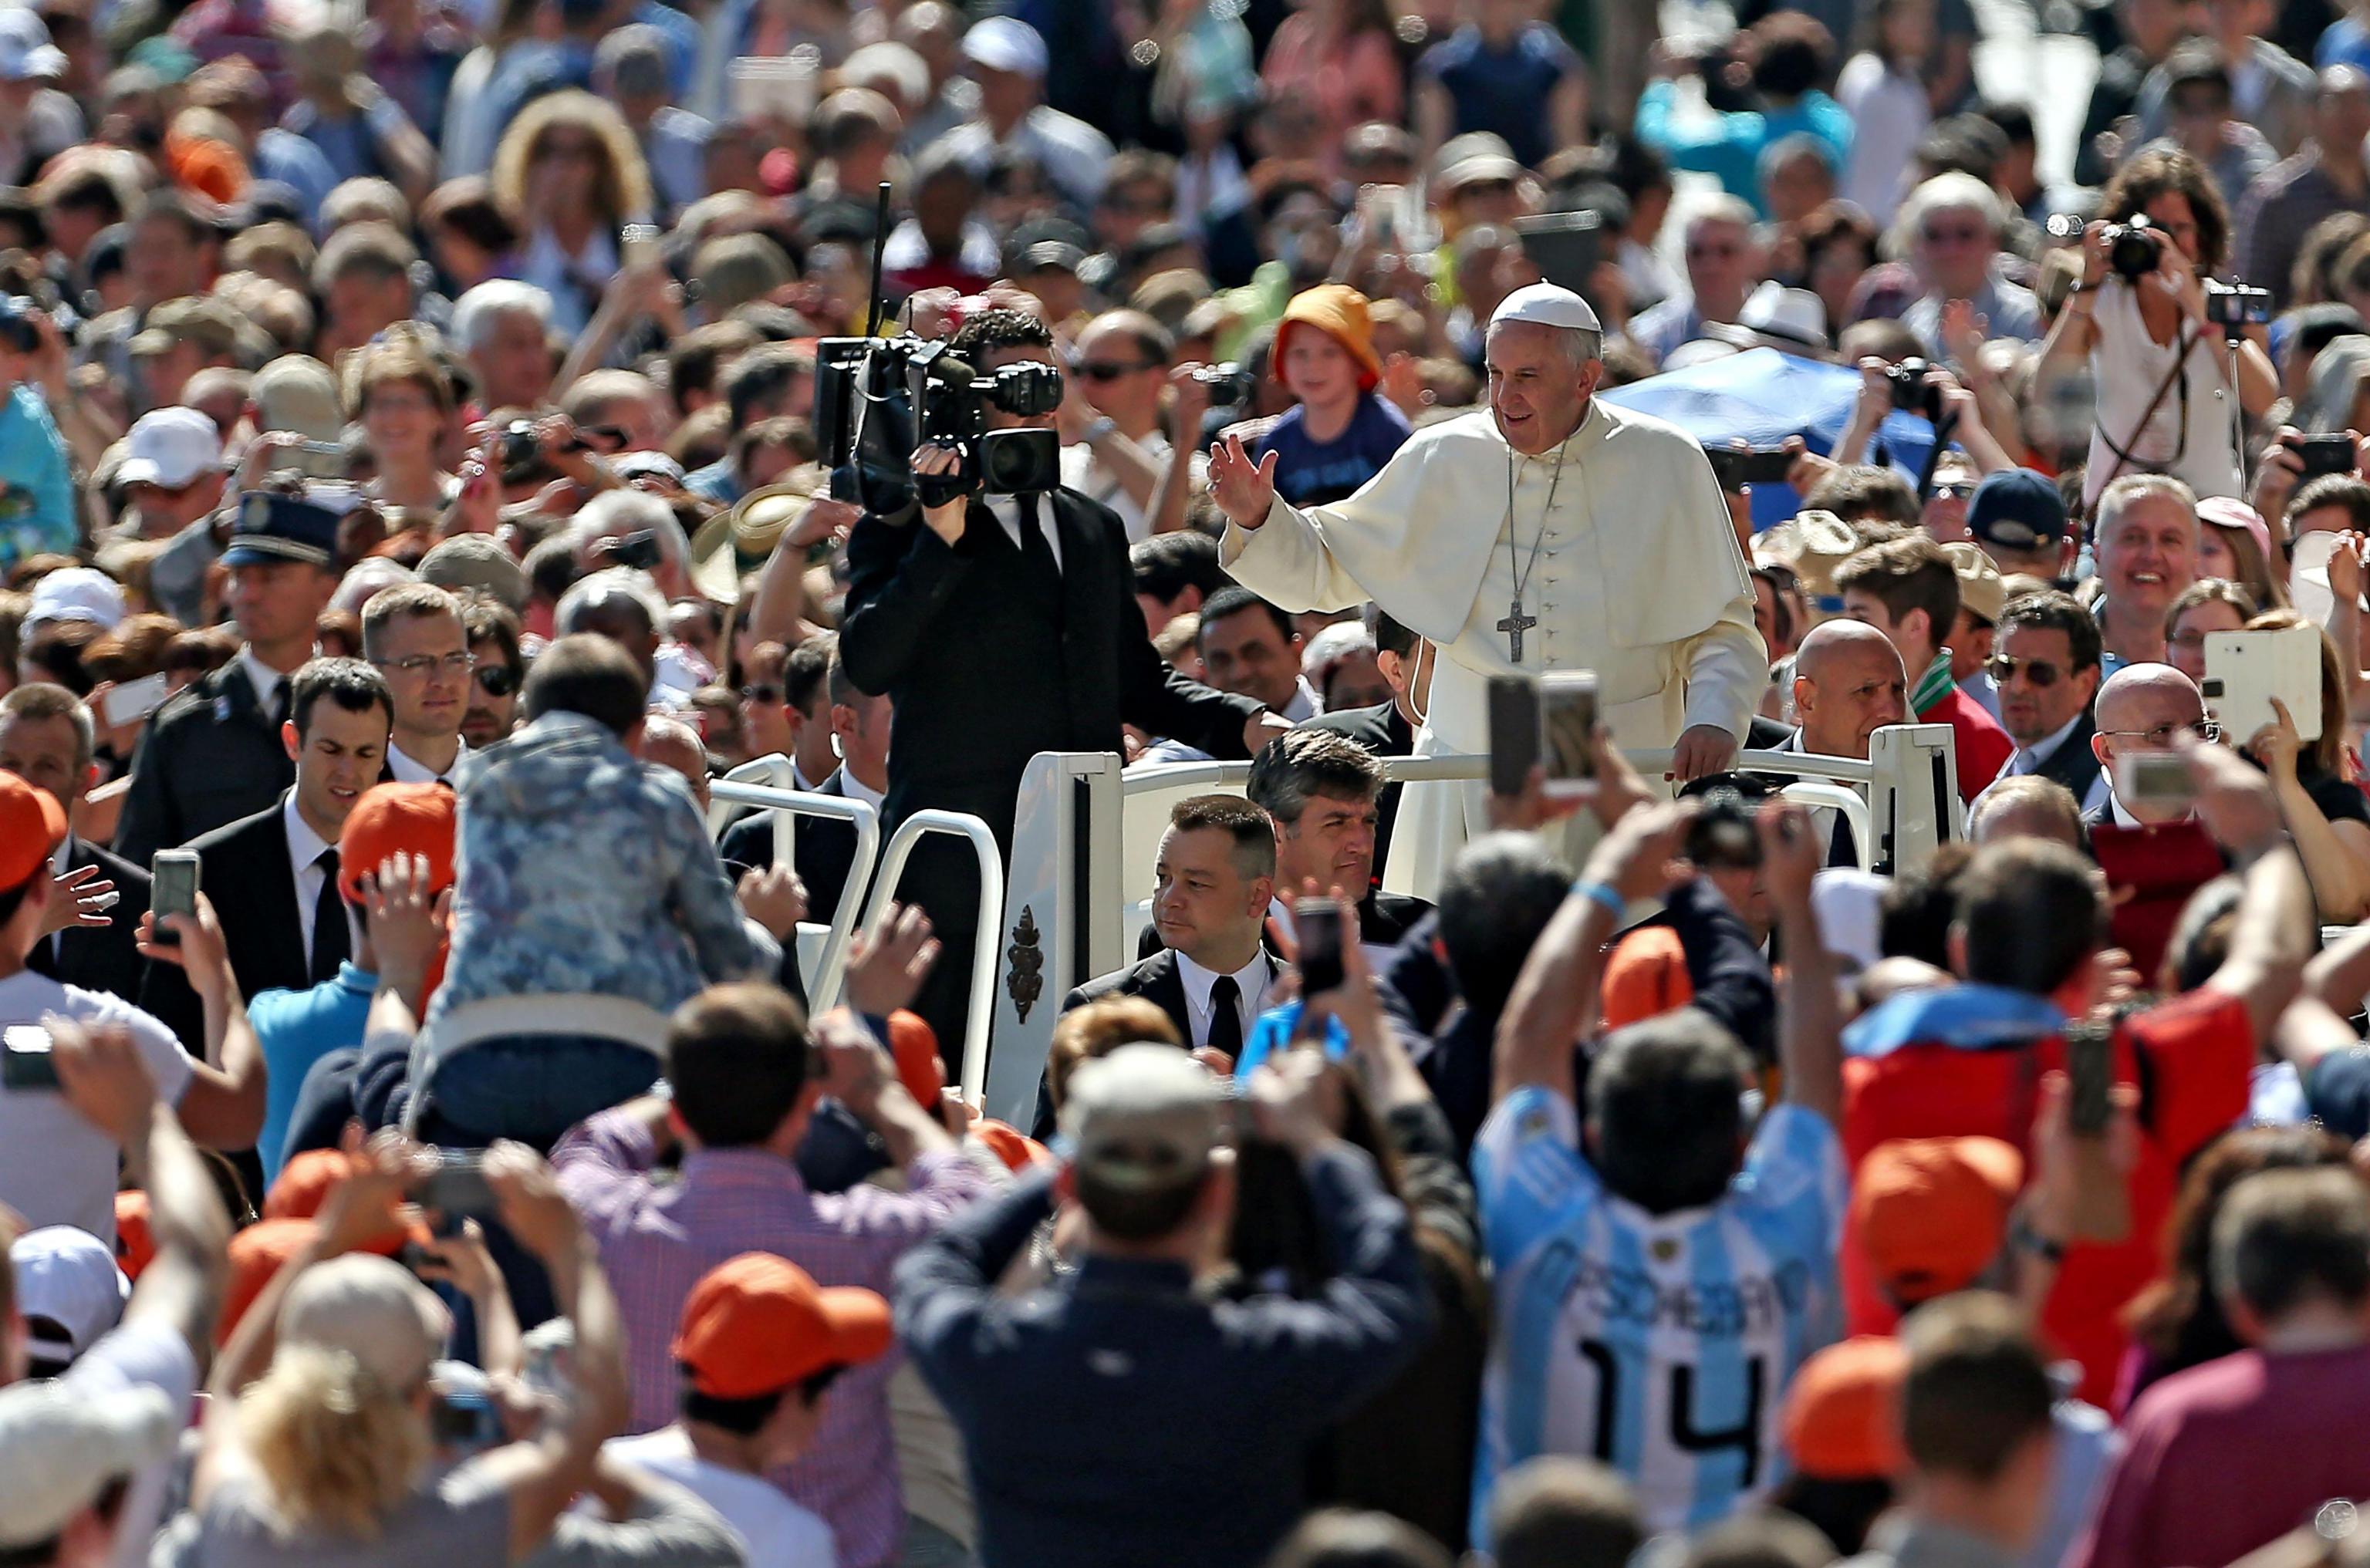 Pope Francis greets the crowd as he arrives for his weekly general audience in St. Peter's Square